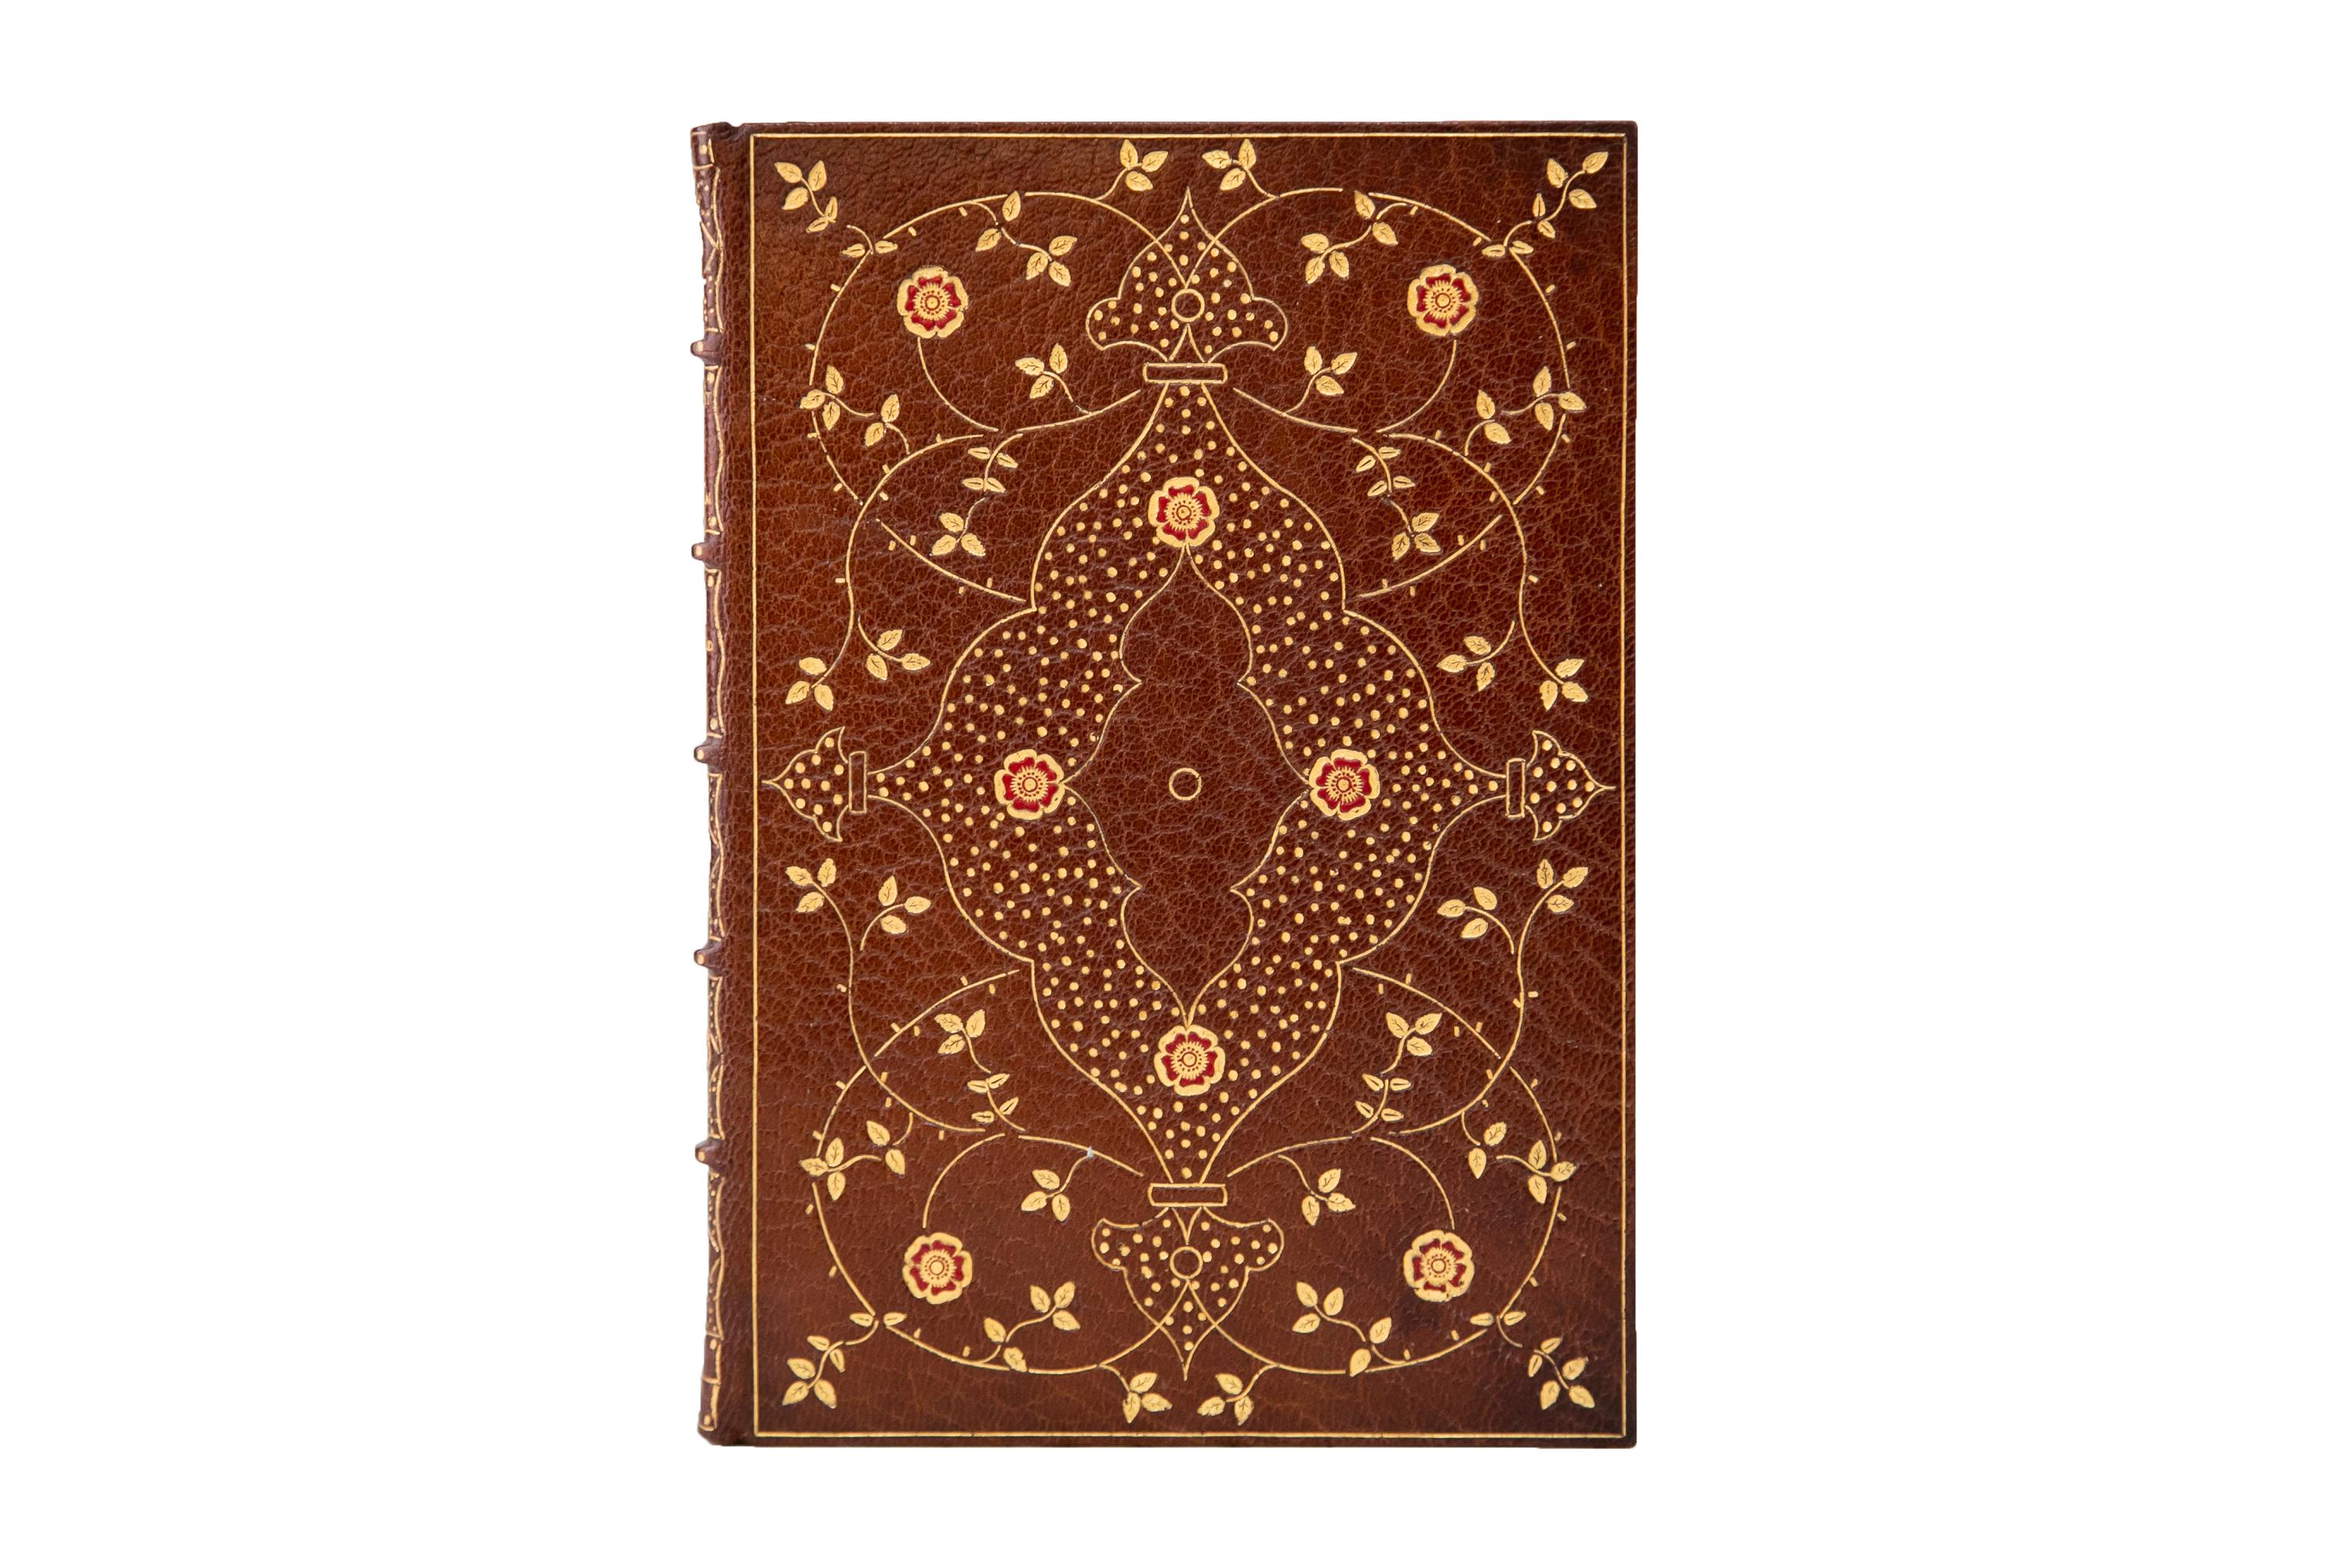 1 Volume. Edward Fitzgerald, Rubáiyát of Omar Khayyám. Bound in full brown morocco with the cover displaying floral gilt-tooled detailing with red inlay. The spines display raised bands, floral panel details, and label lettering, all gilt-tooled